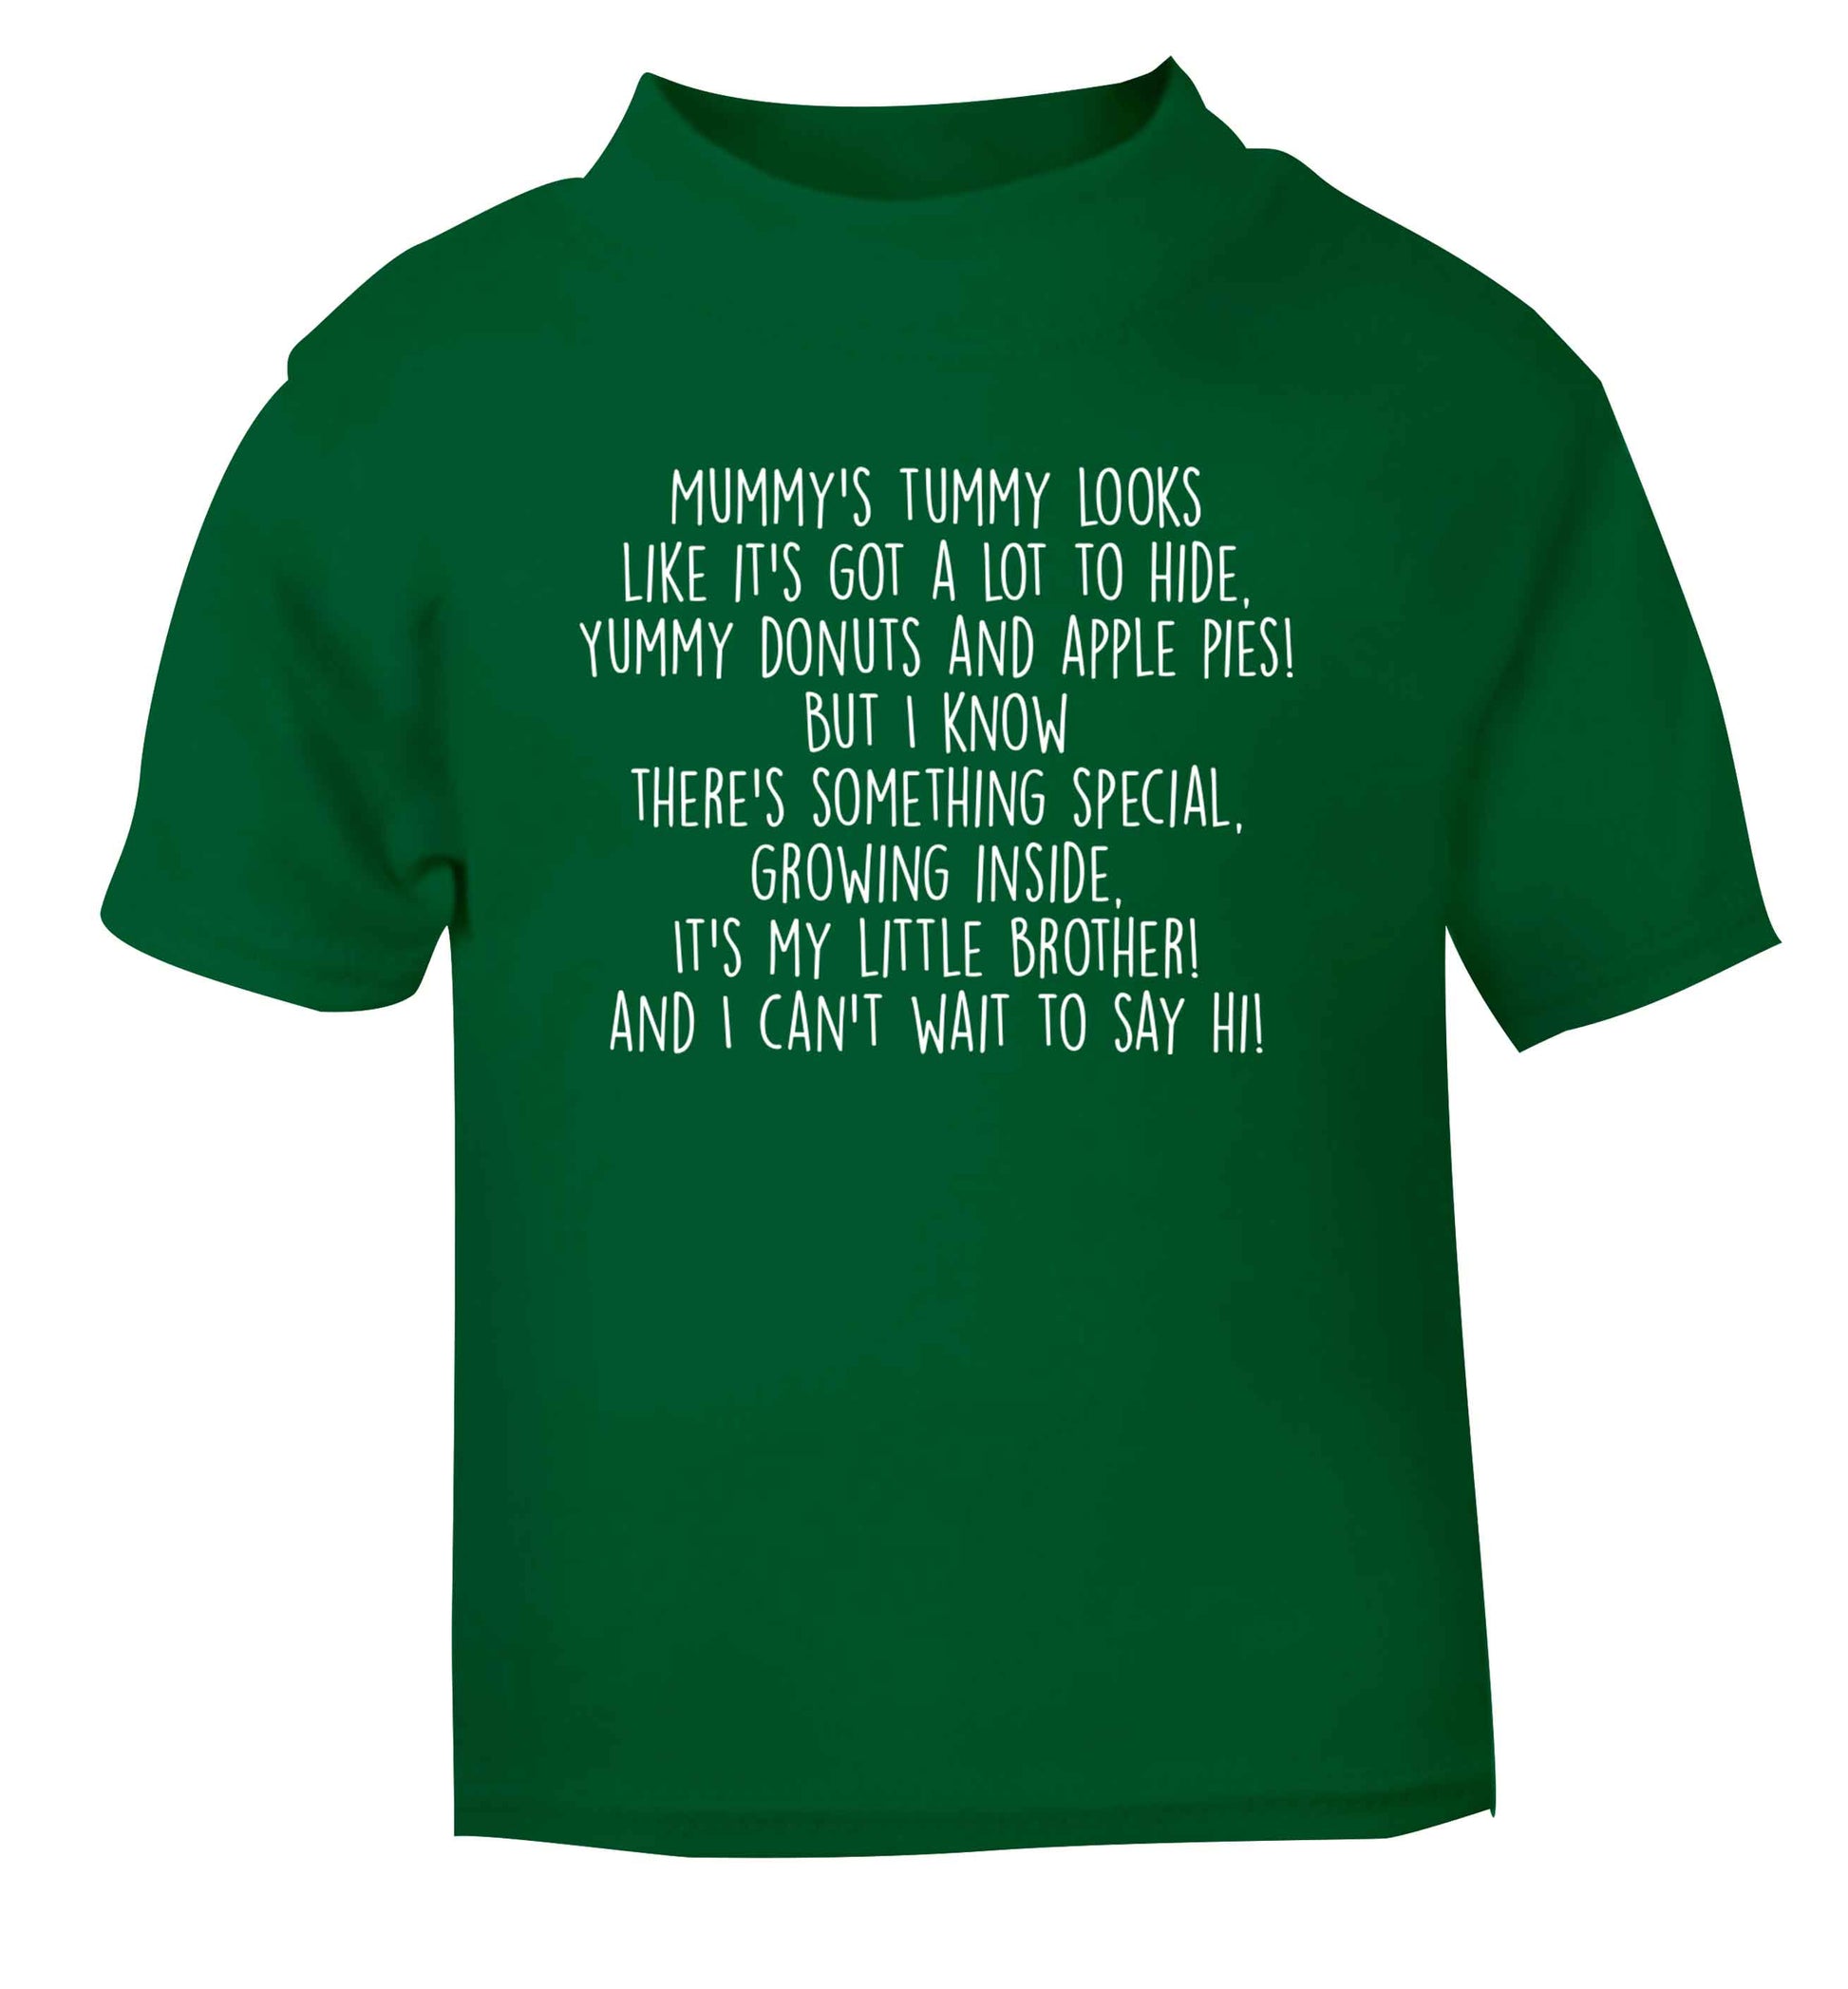 Something special growing inside it's my little brother I can't wait to say hi! green Baby Toddler Tshirt 2 Years